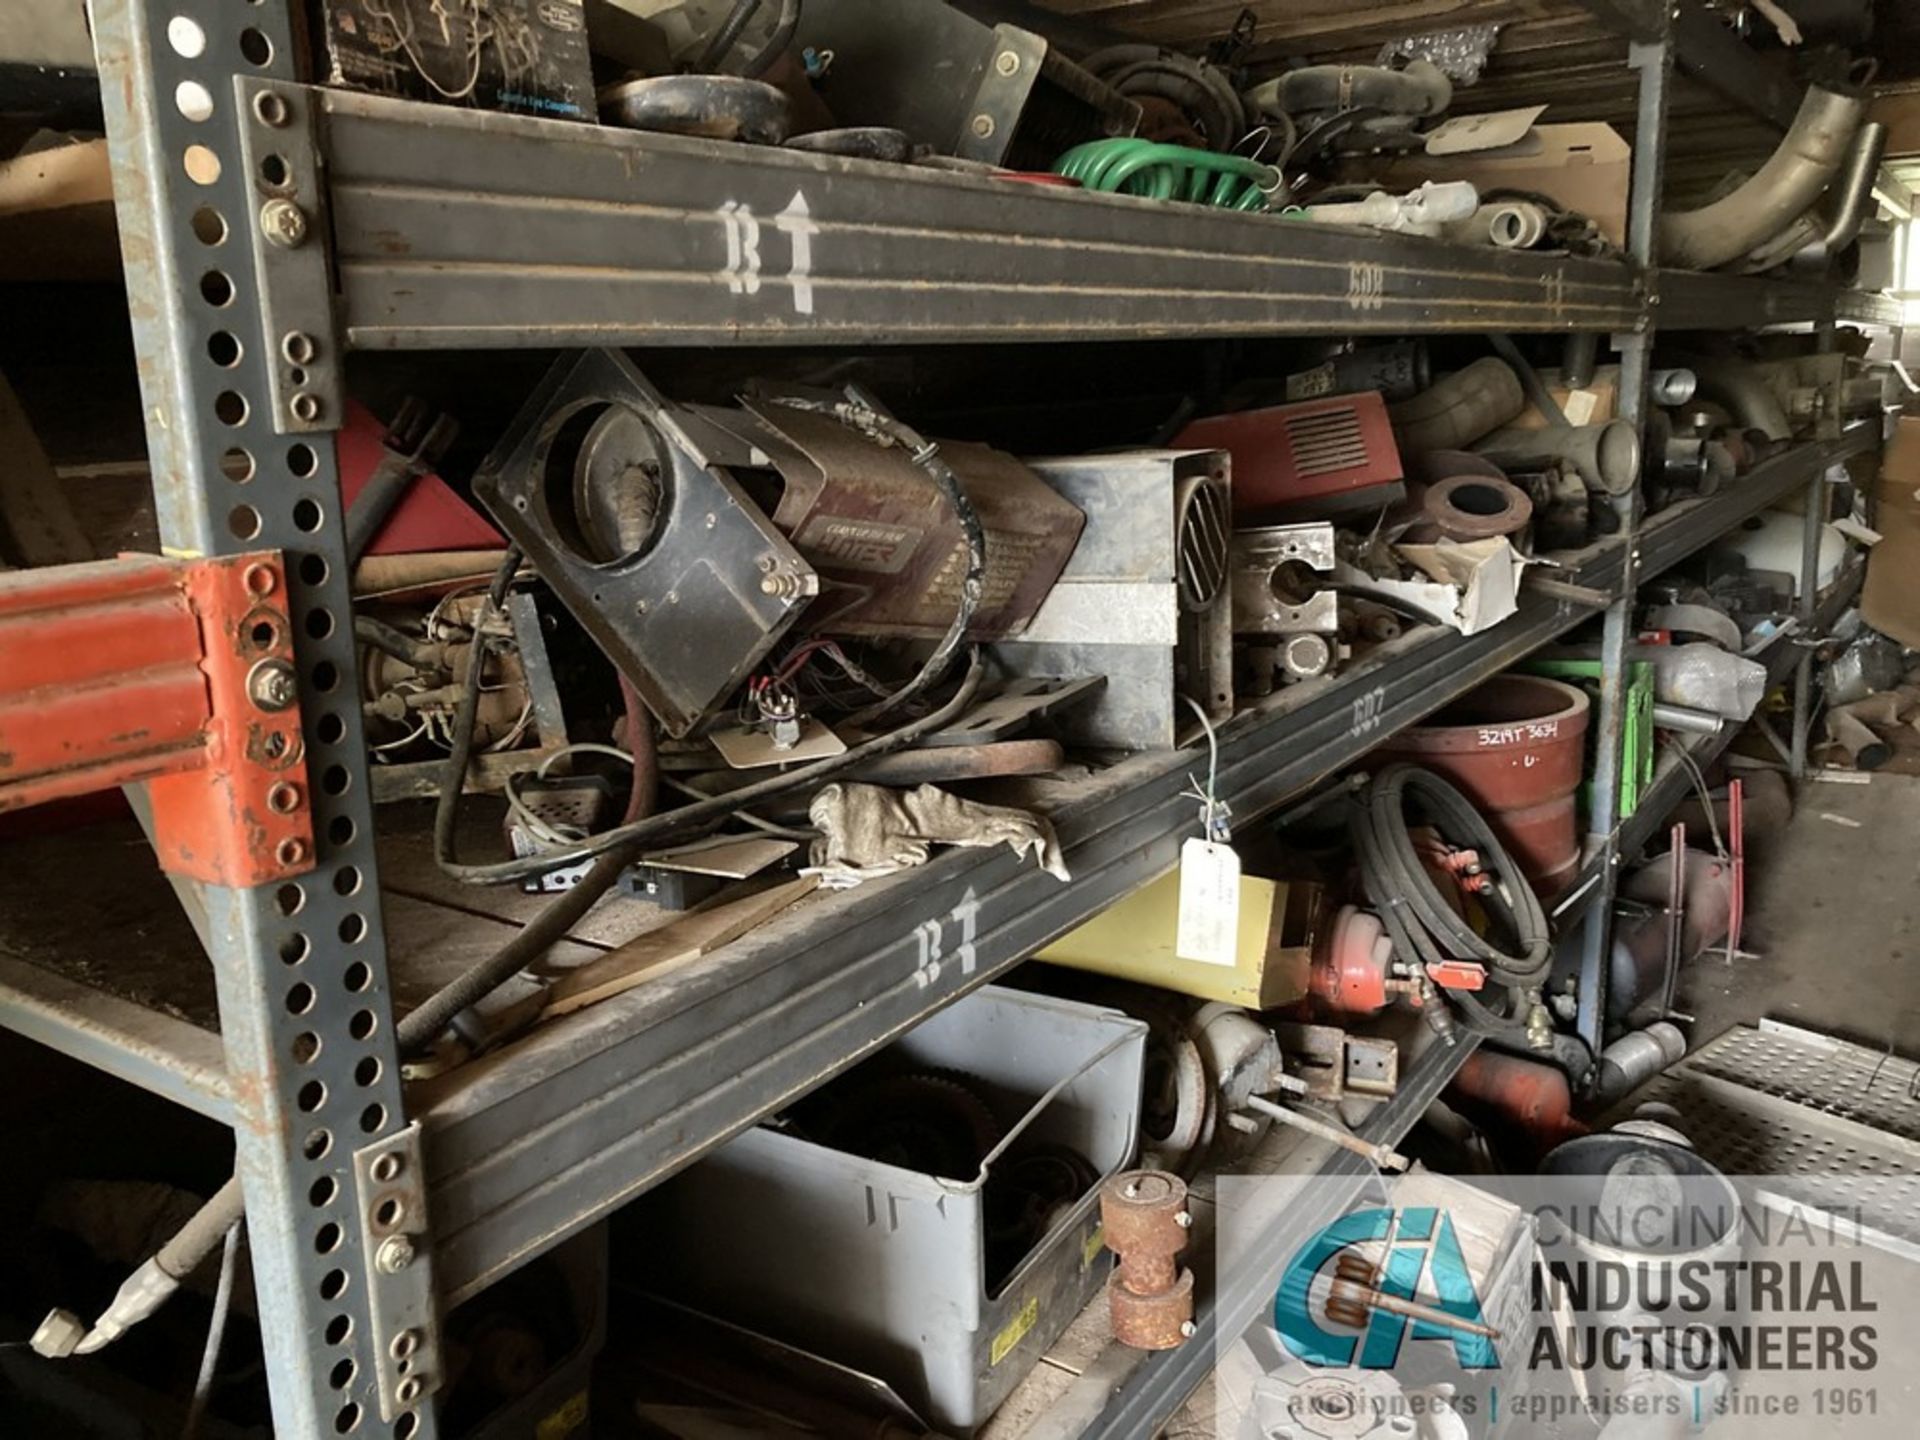 (LOT) CONTENTS OF TRAILER - TRUCK PARTS, TRANSMISSIONS, GEAR CASES AND OTHER